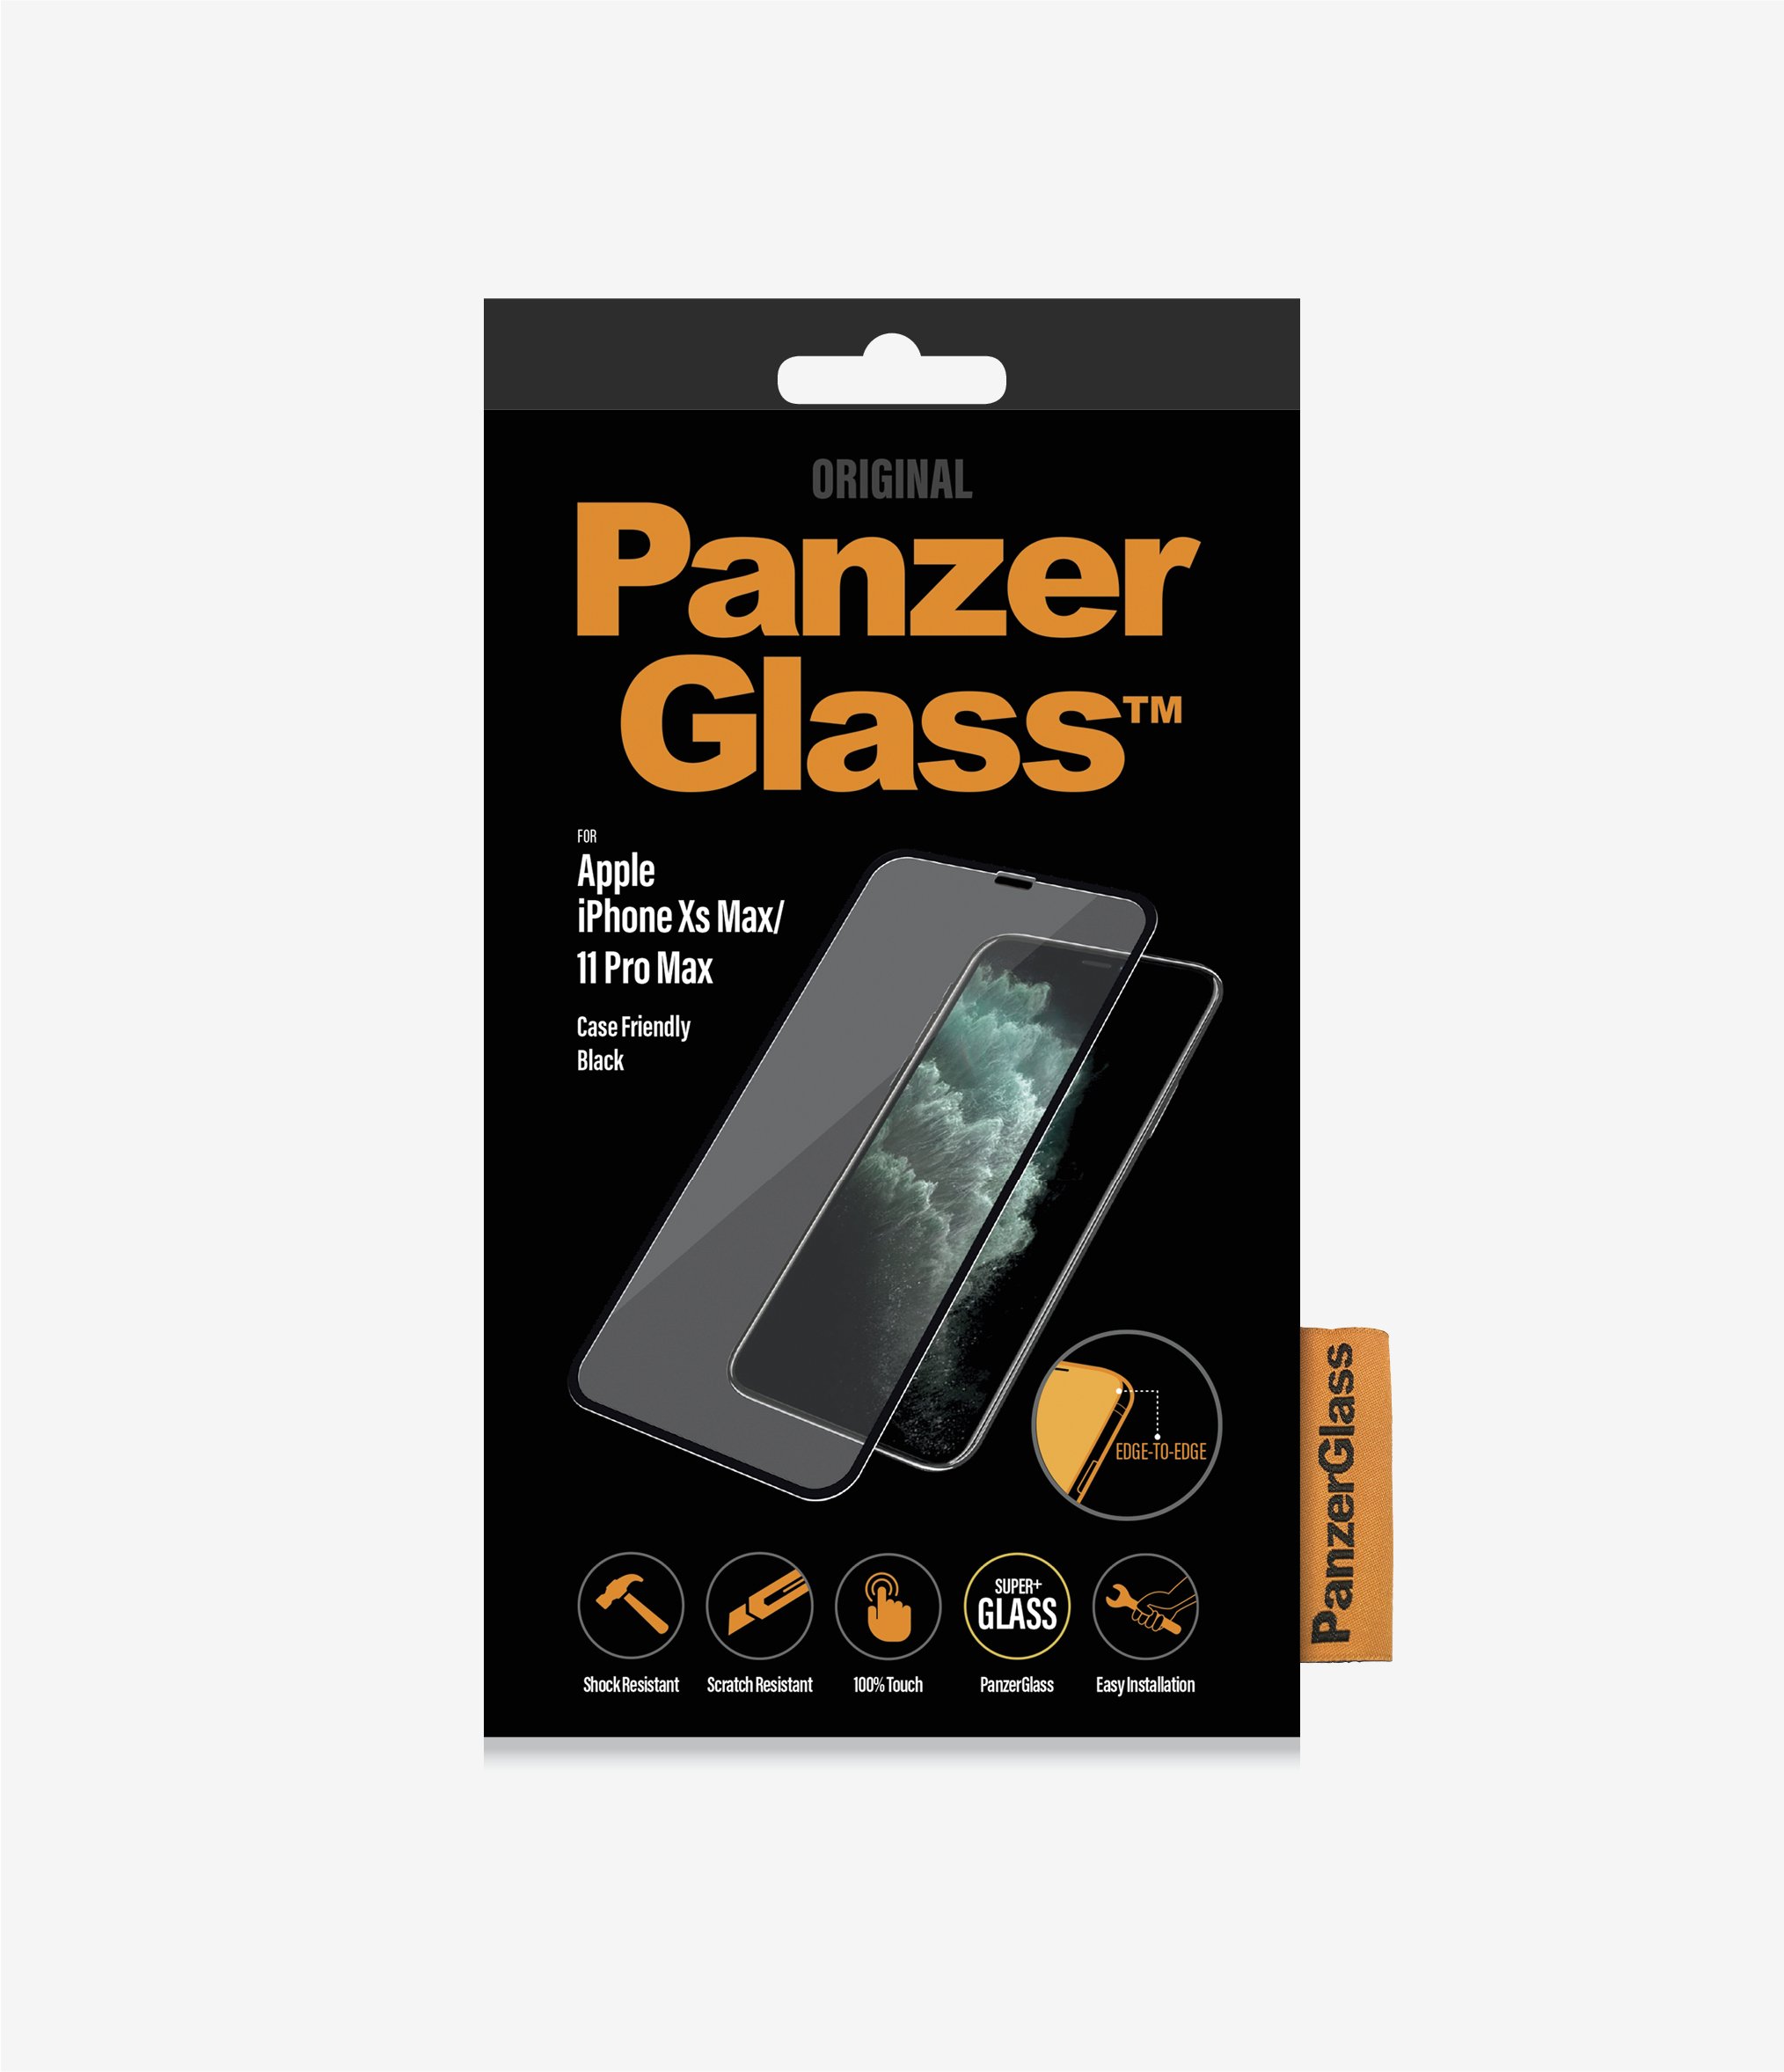 PanzerGlass™ Apple iPhone Xs Max / 11 Pro Max - Clear GLass (2666) - Screen Protector - Full frame coverage, Rounded edges, 100% touch preservation